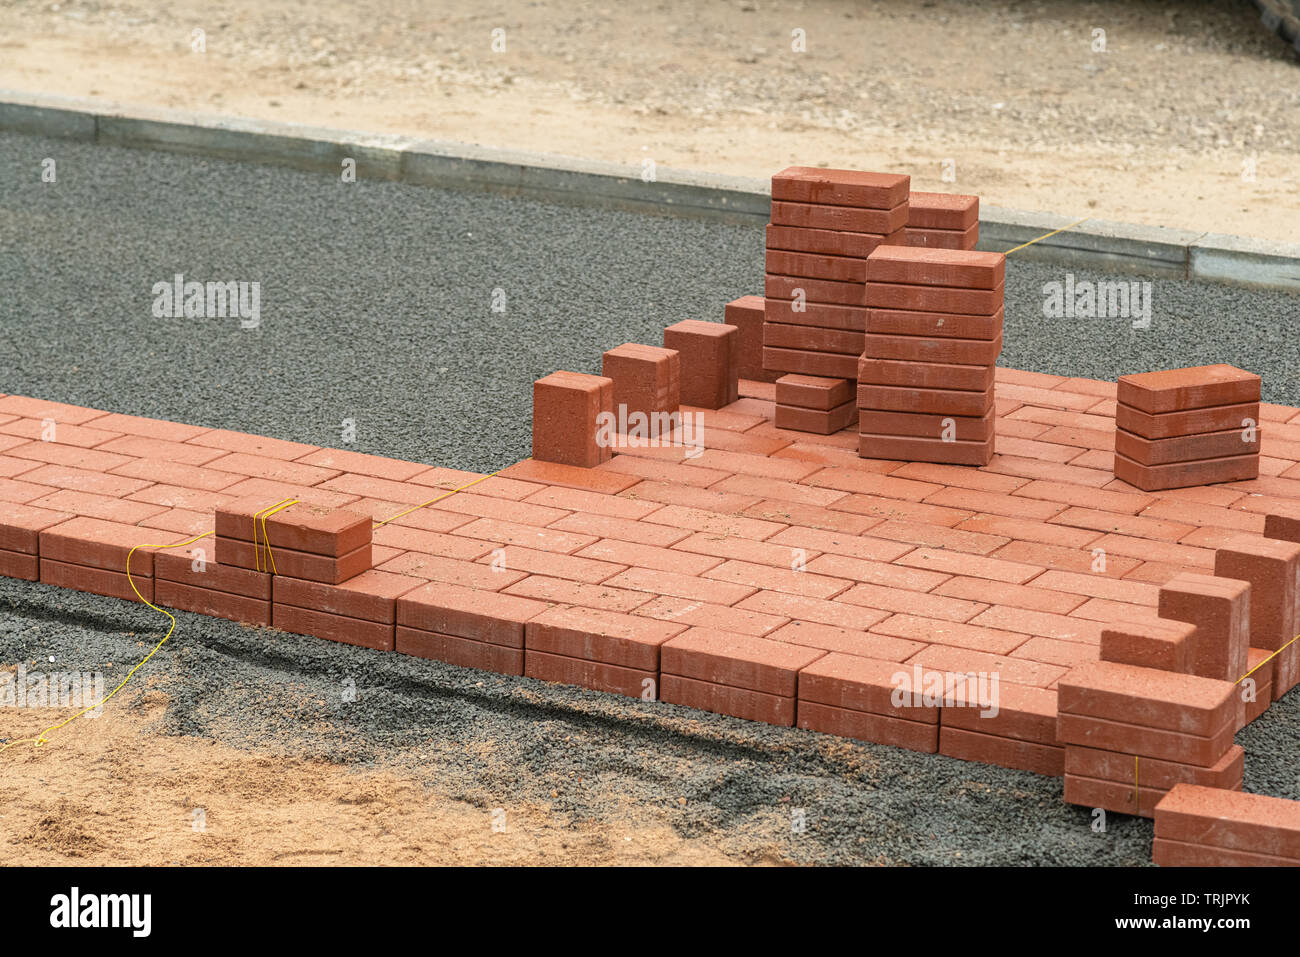 Laying red tiles on the sidewalk outdoors. Renovating paving in the street, construction, urban development Stock Photo